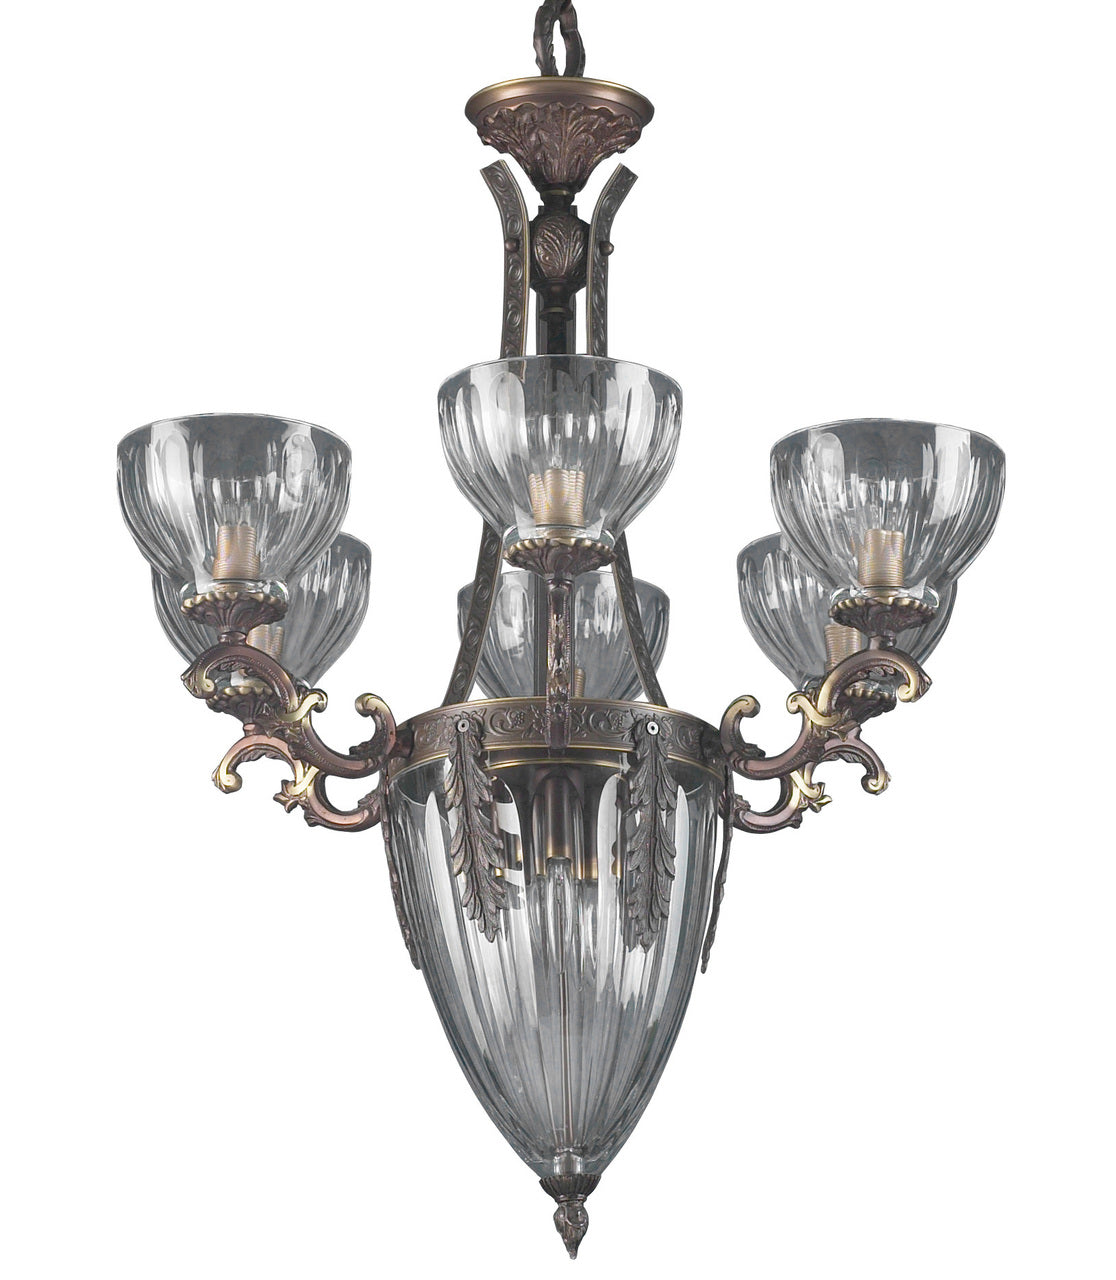 Classic Lighting 55437 RB Warsaw Cast Brass/Lead Crystal Chandelier in Roman Bronze (Imported from Spain)